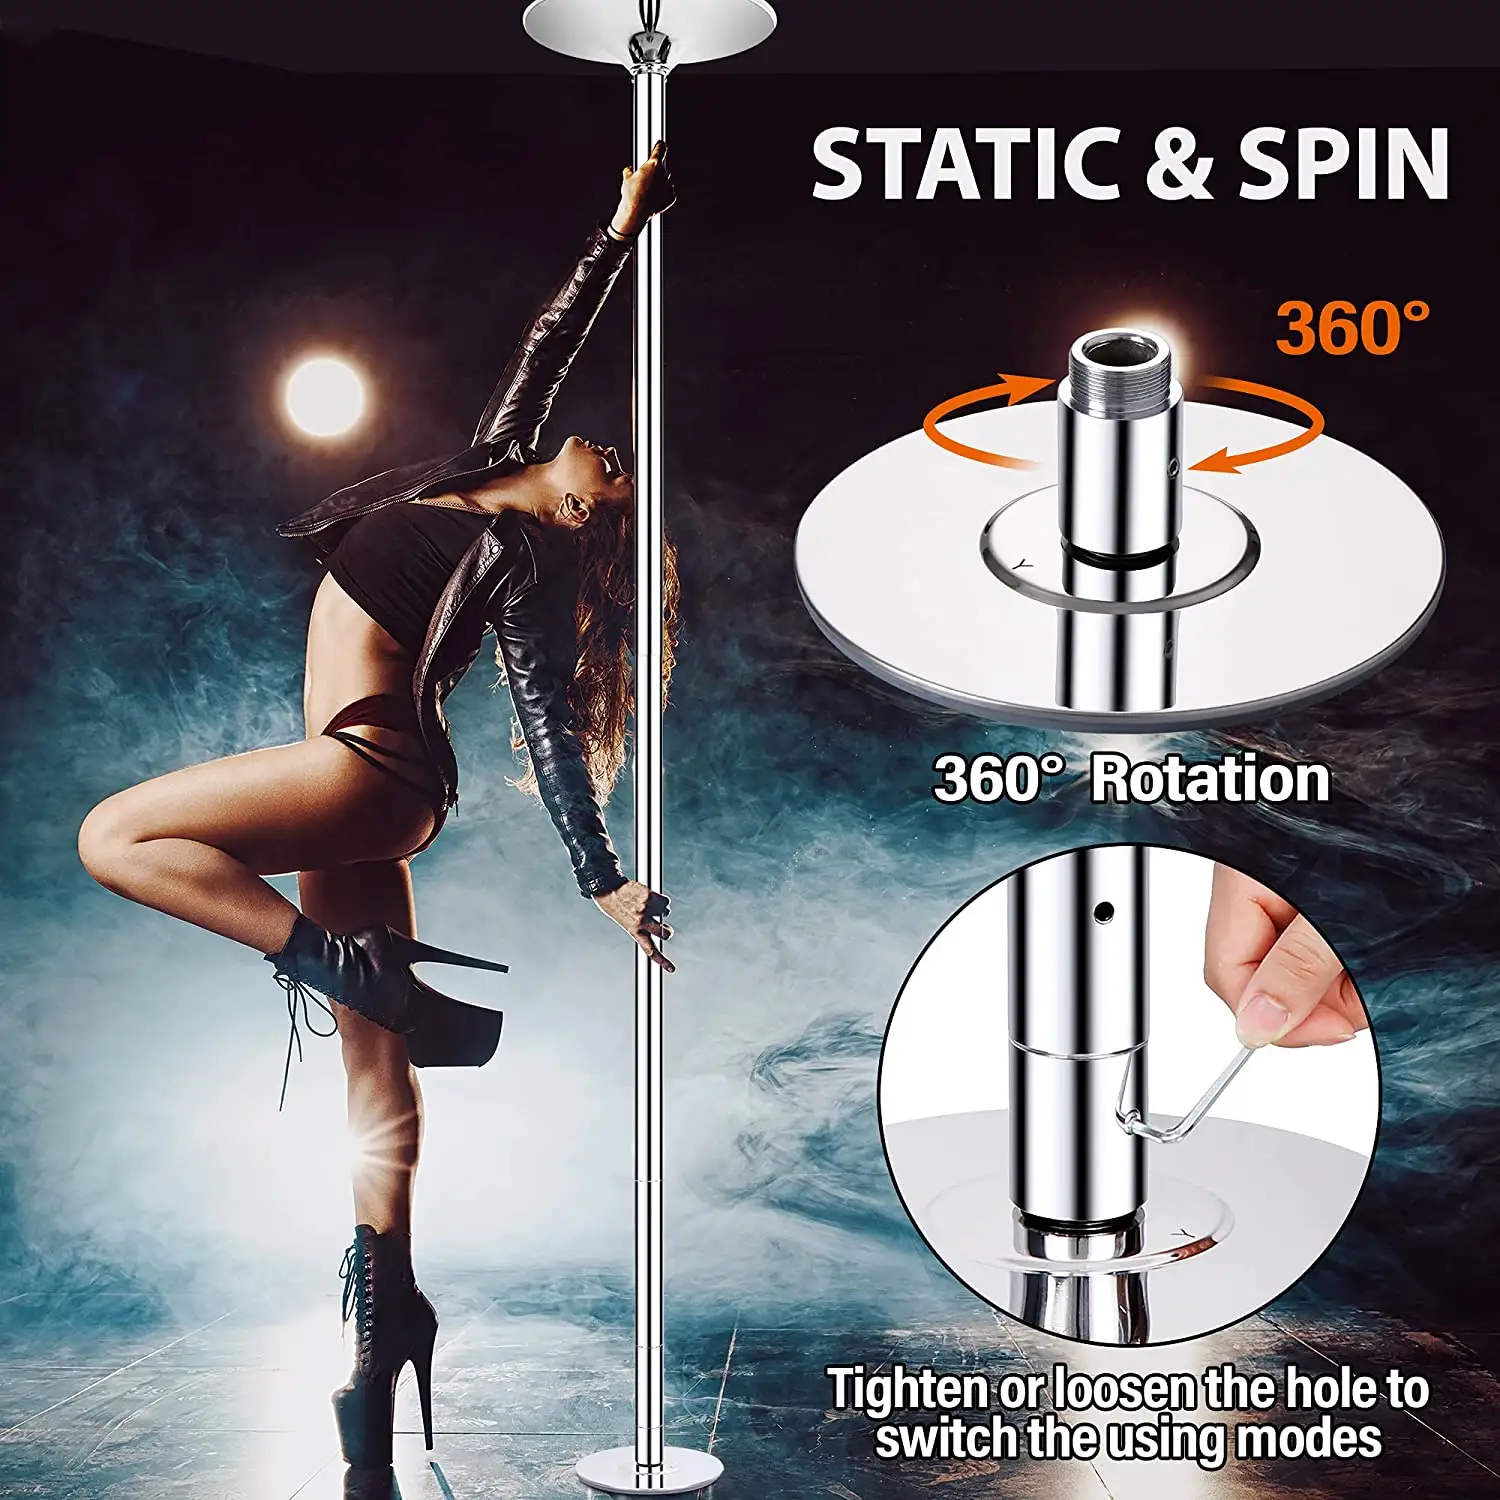 At Home Fitness Pole Dancing Tubes Chromed 45mm Stripper Dance Pole Professional Height Adjustable Spinning Pole Dance